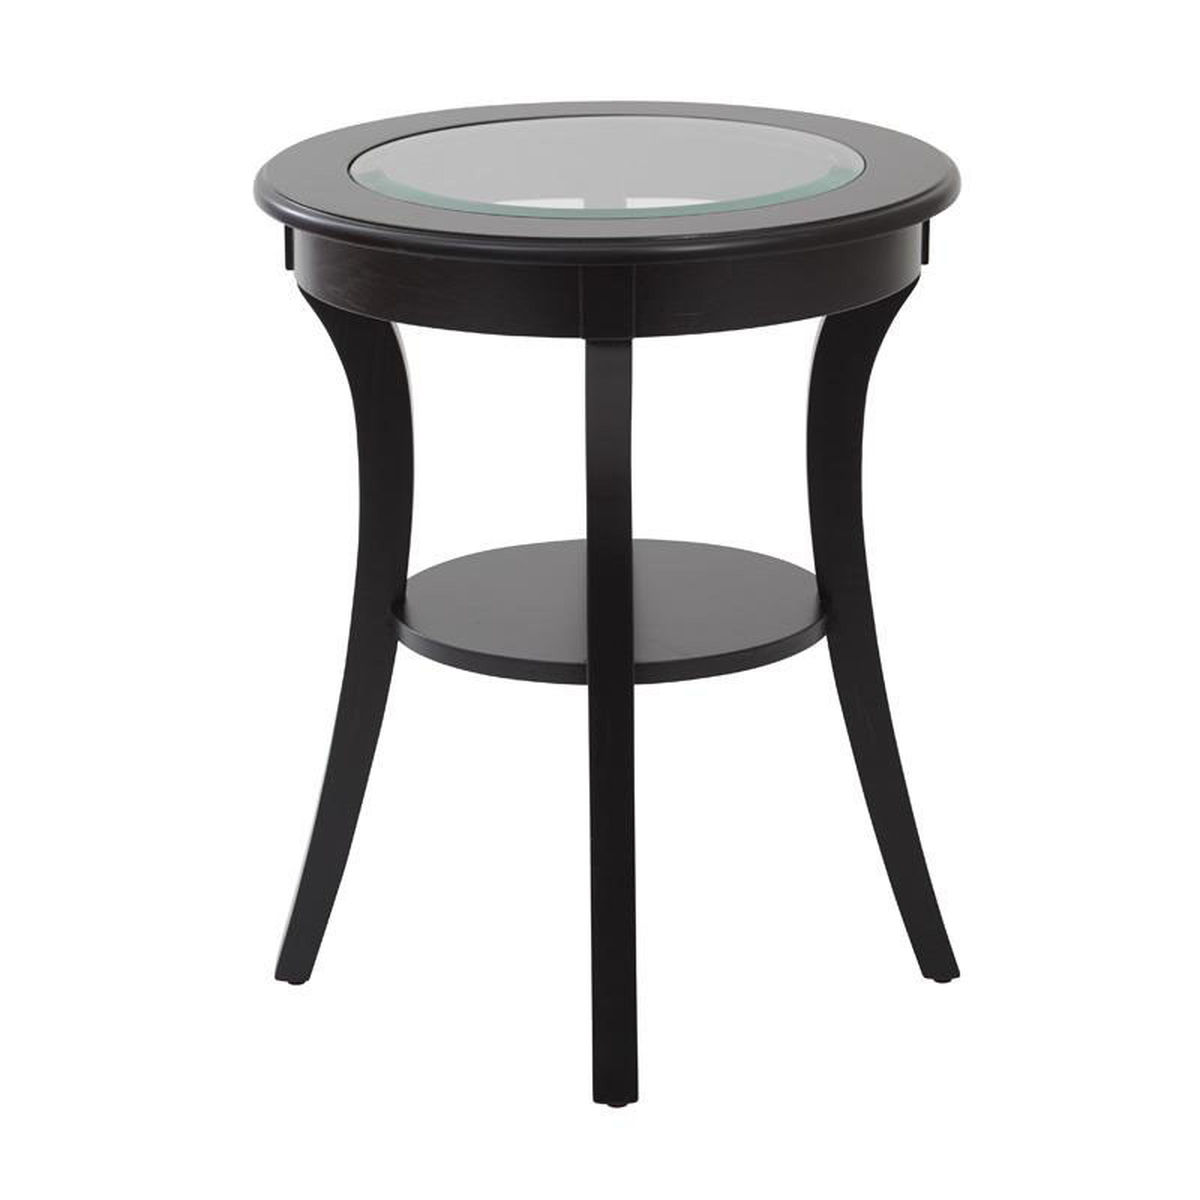 harper black glass accent table bizchair office star products round wood and metal our osp designs top with finish shelf drop leaf chair storage asian lamp small pine end